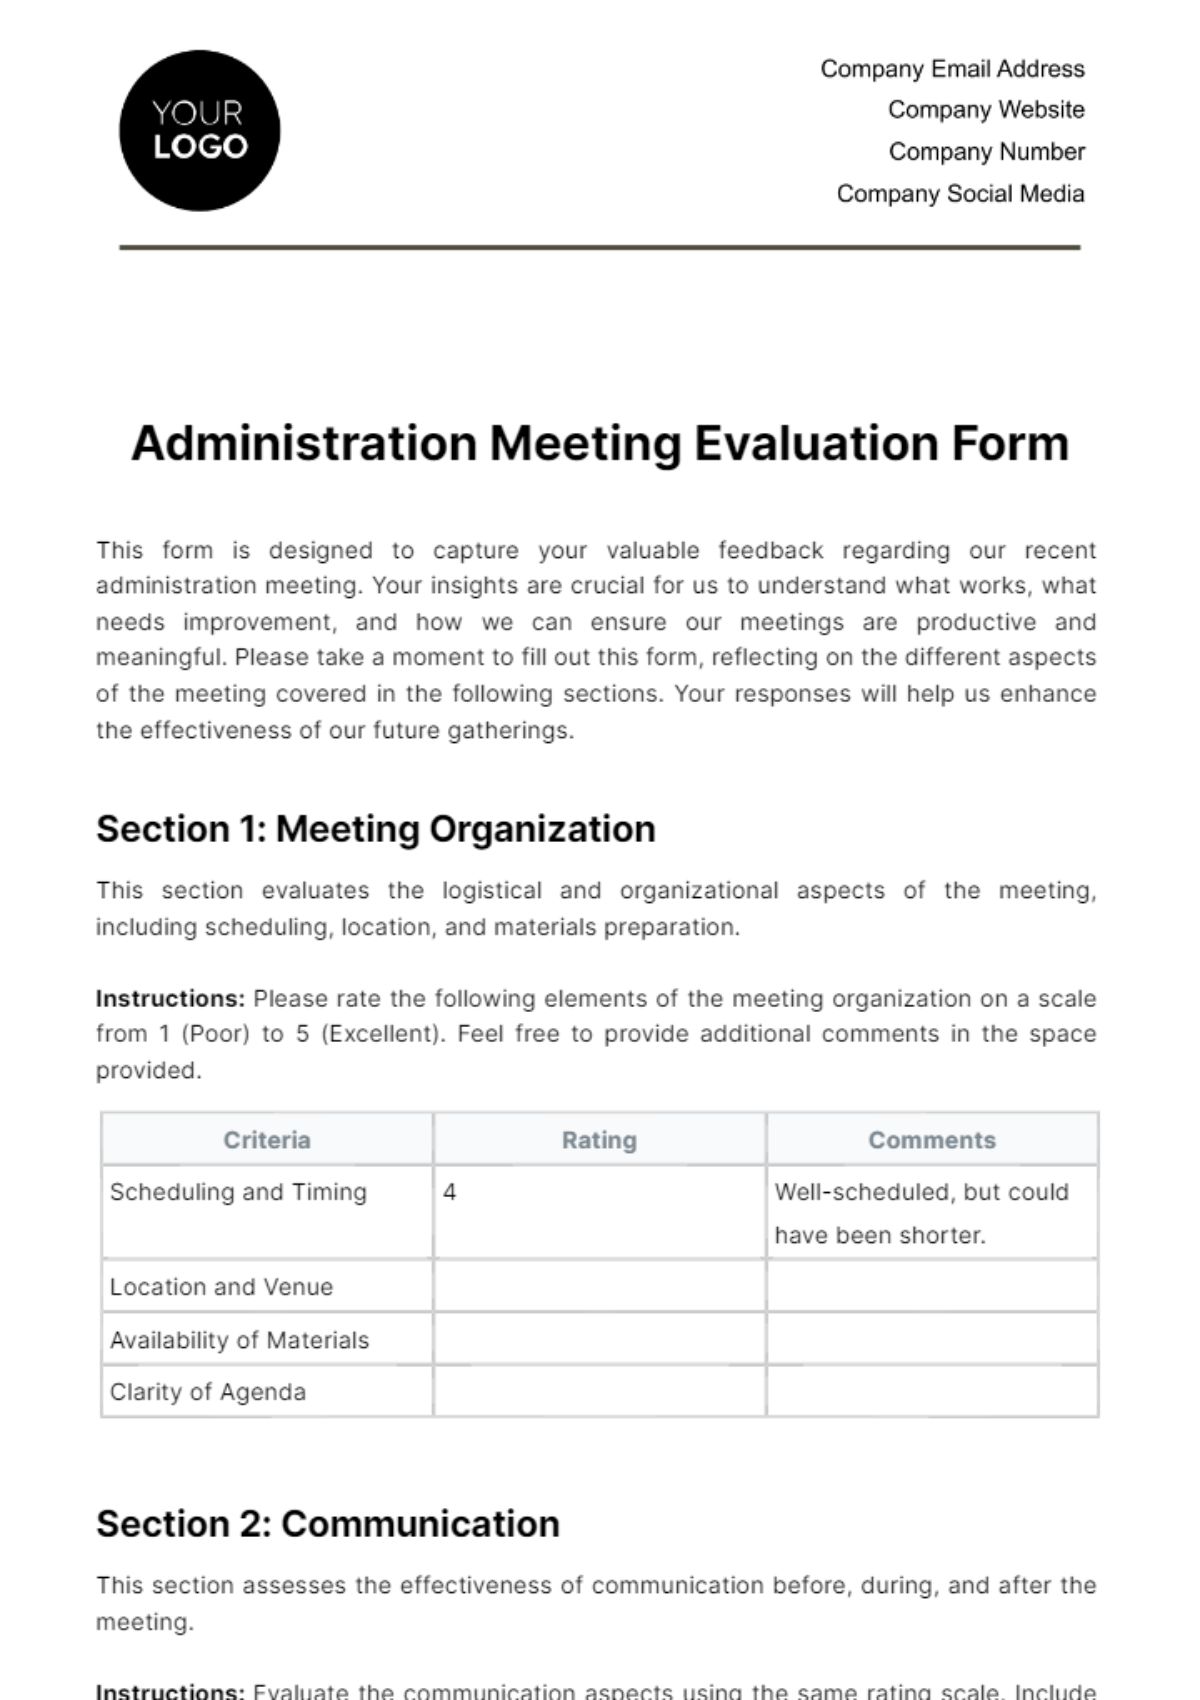 Administration Meeting Evaluation Form Template